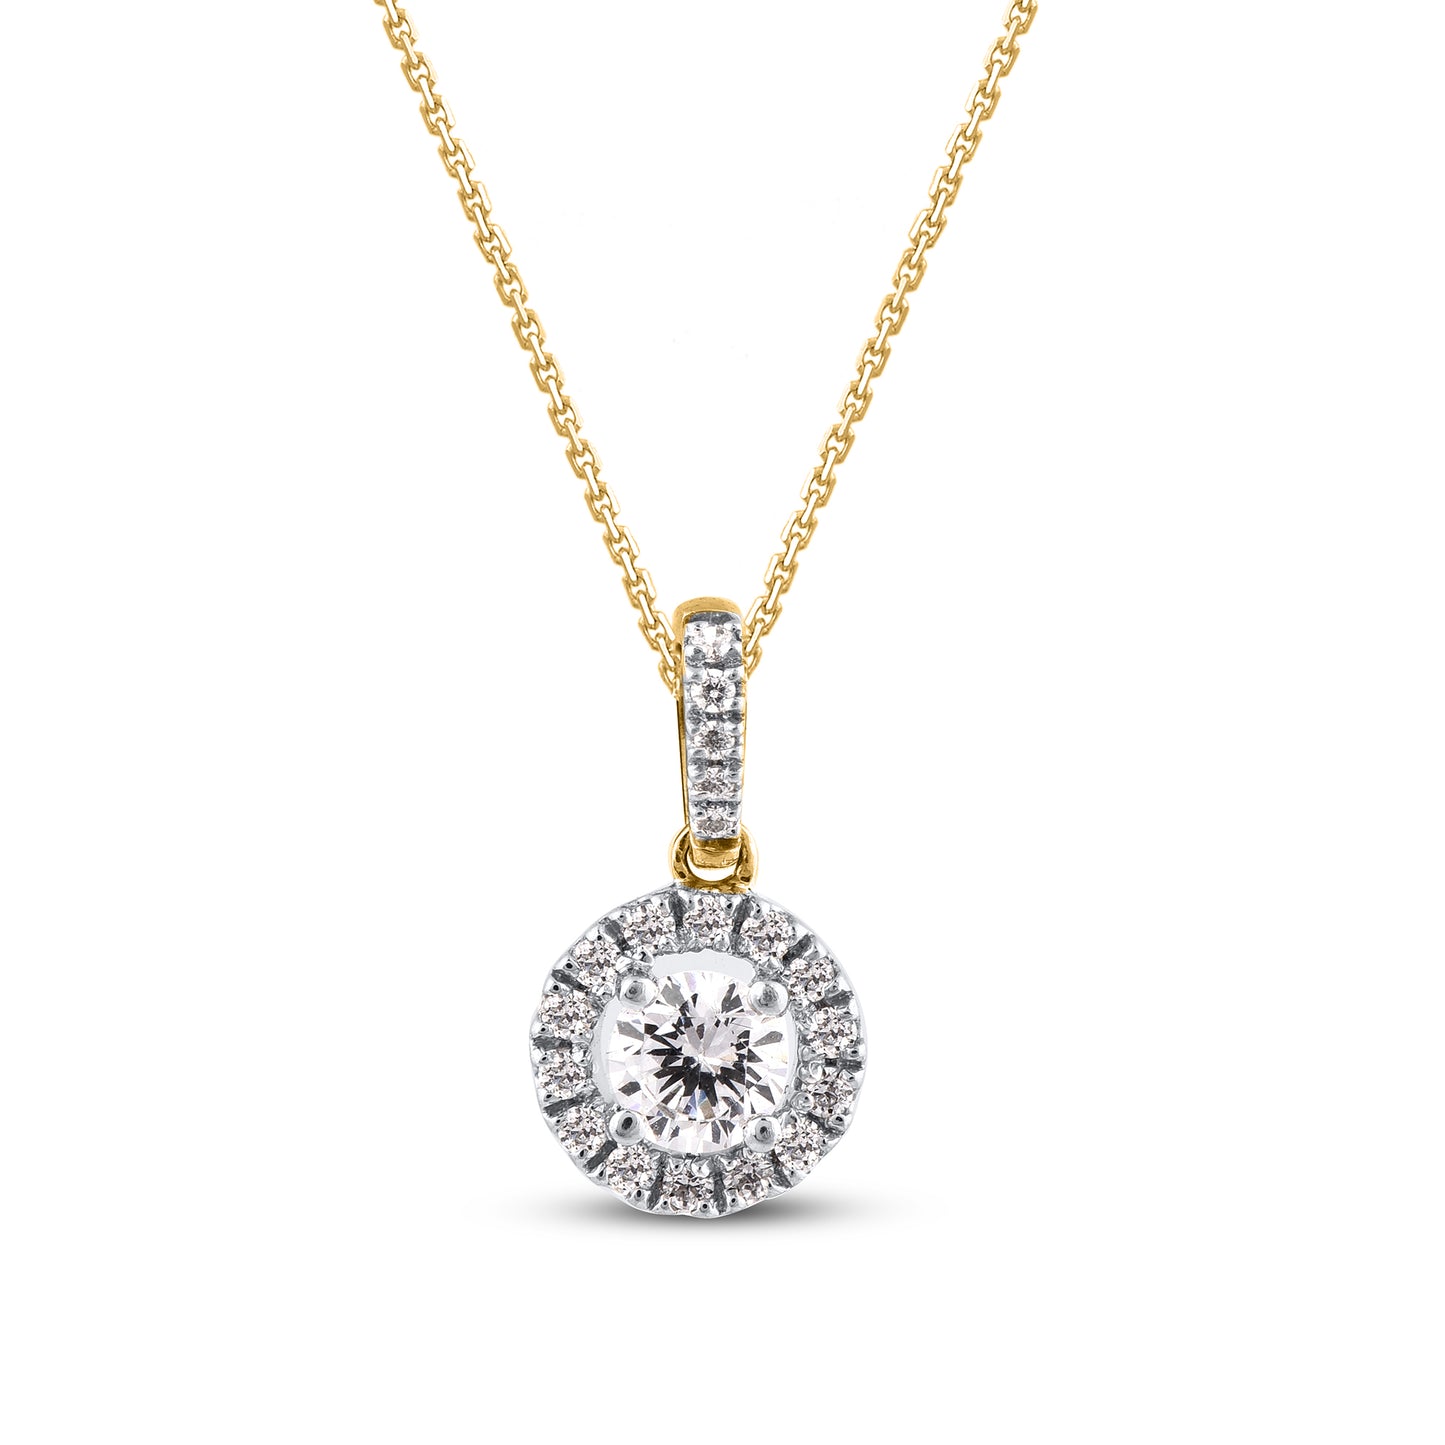 Dangling Halo Drop Pendant Necklace in 10K Gold